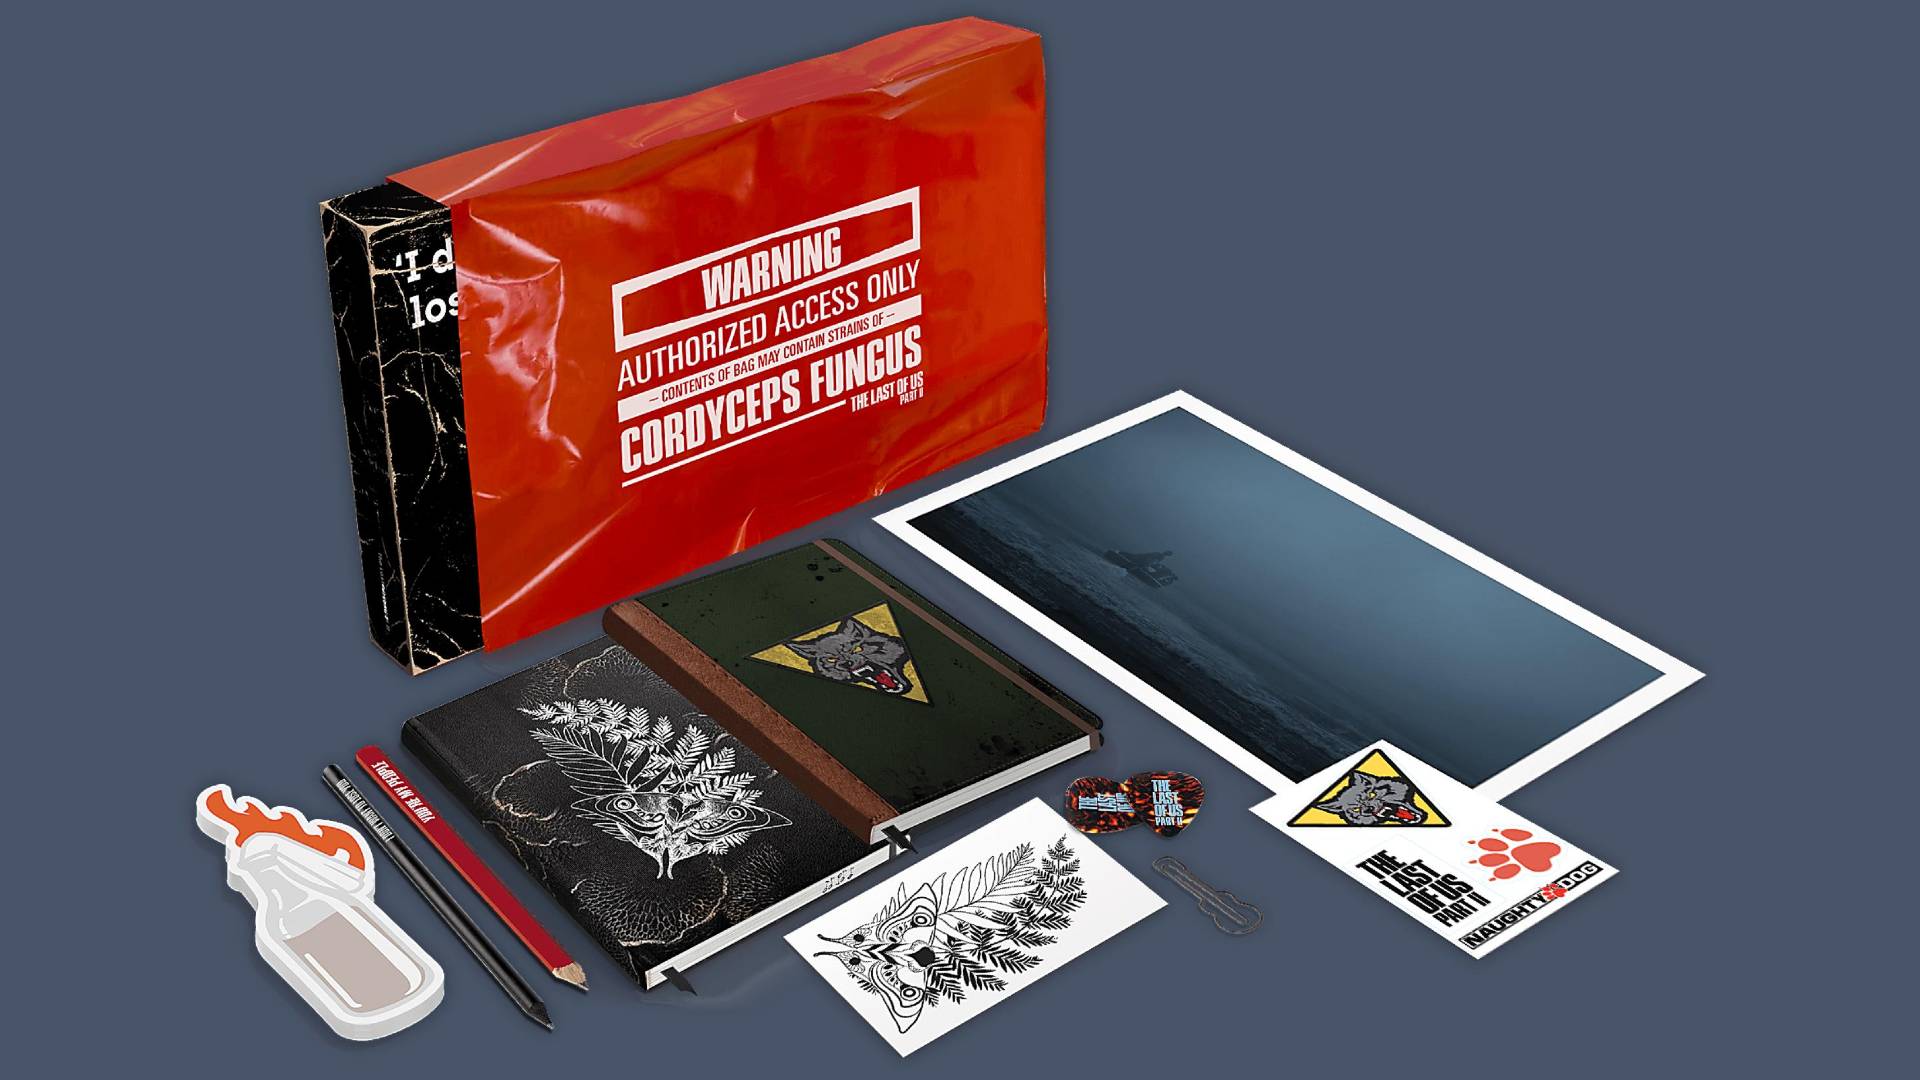 The Last of Us Part 2 is getting a stationery set